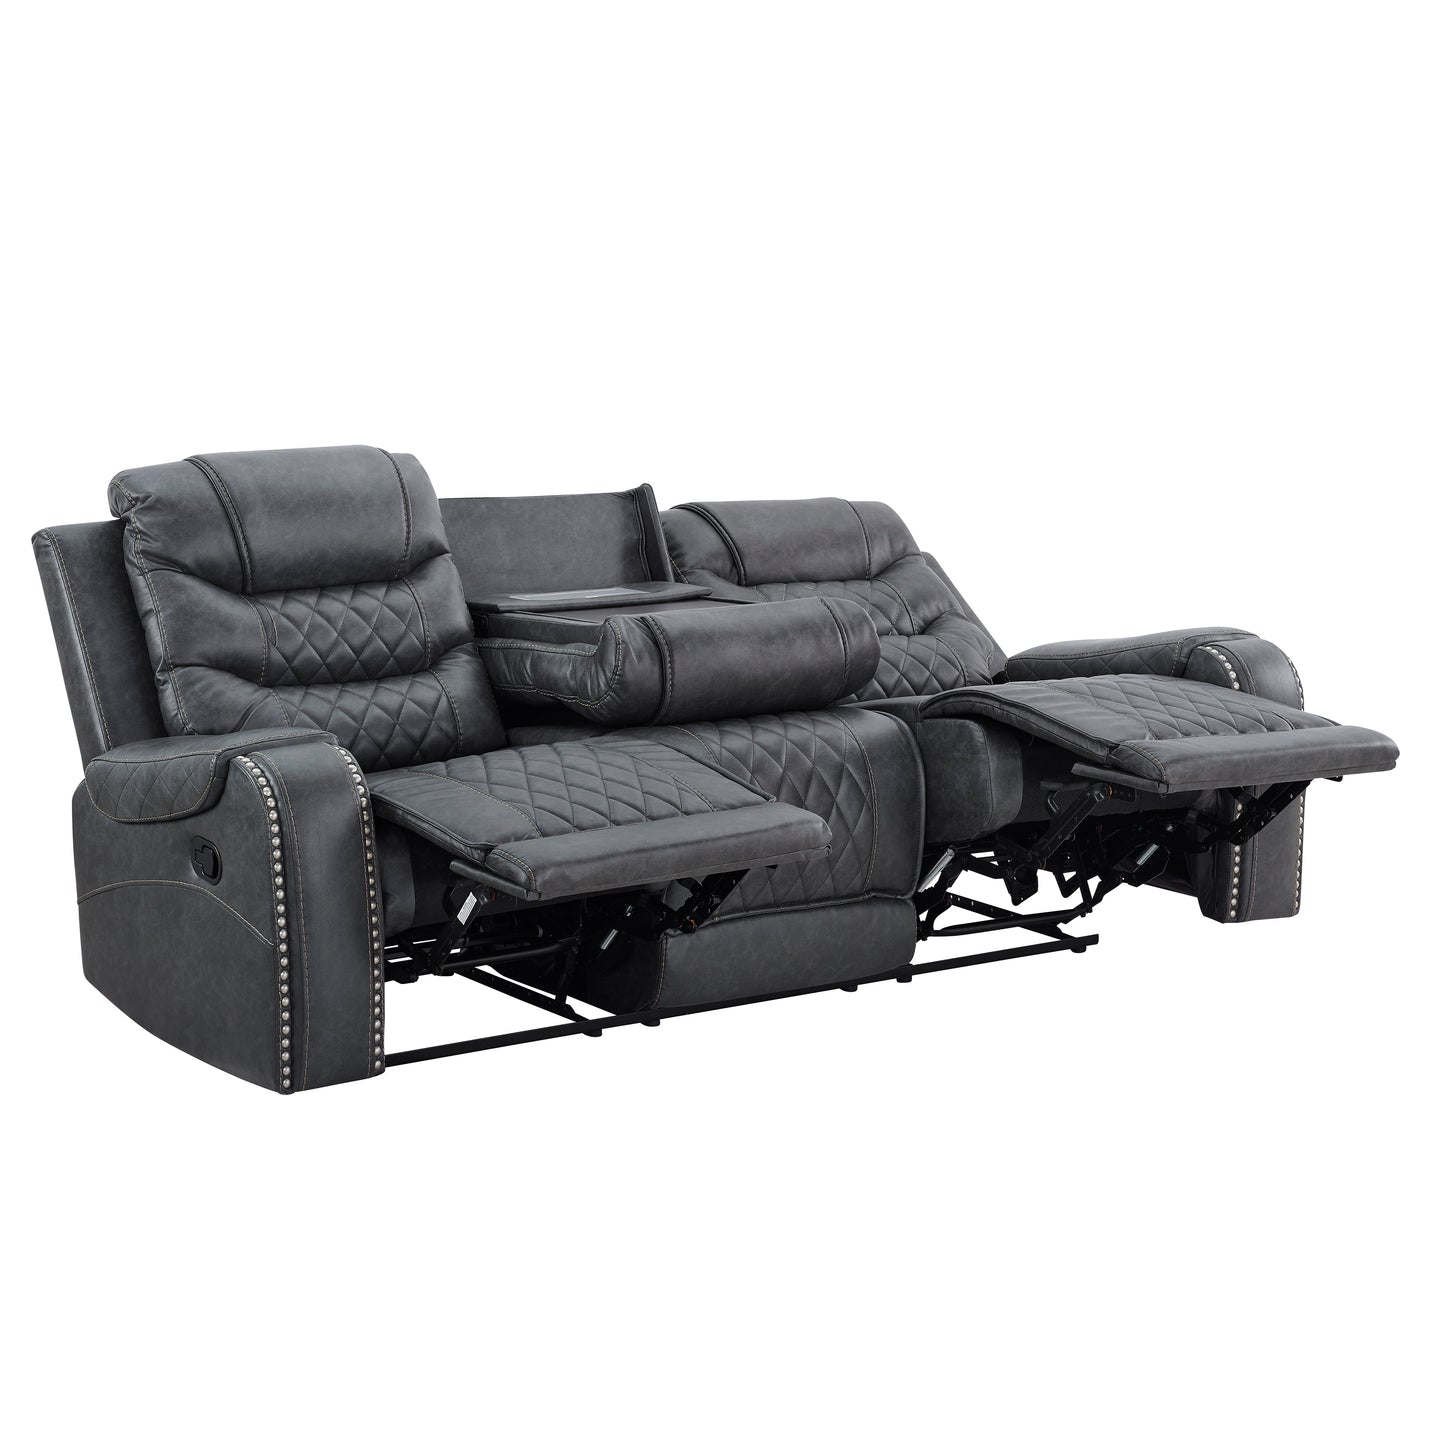 Klens Faux Leather 3-Piece Reclining Living Room Collection with Nailhead Trim, Gray